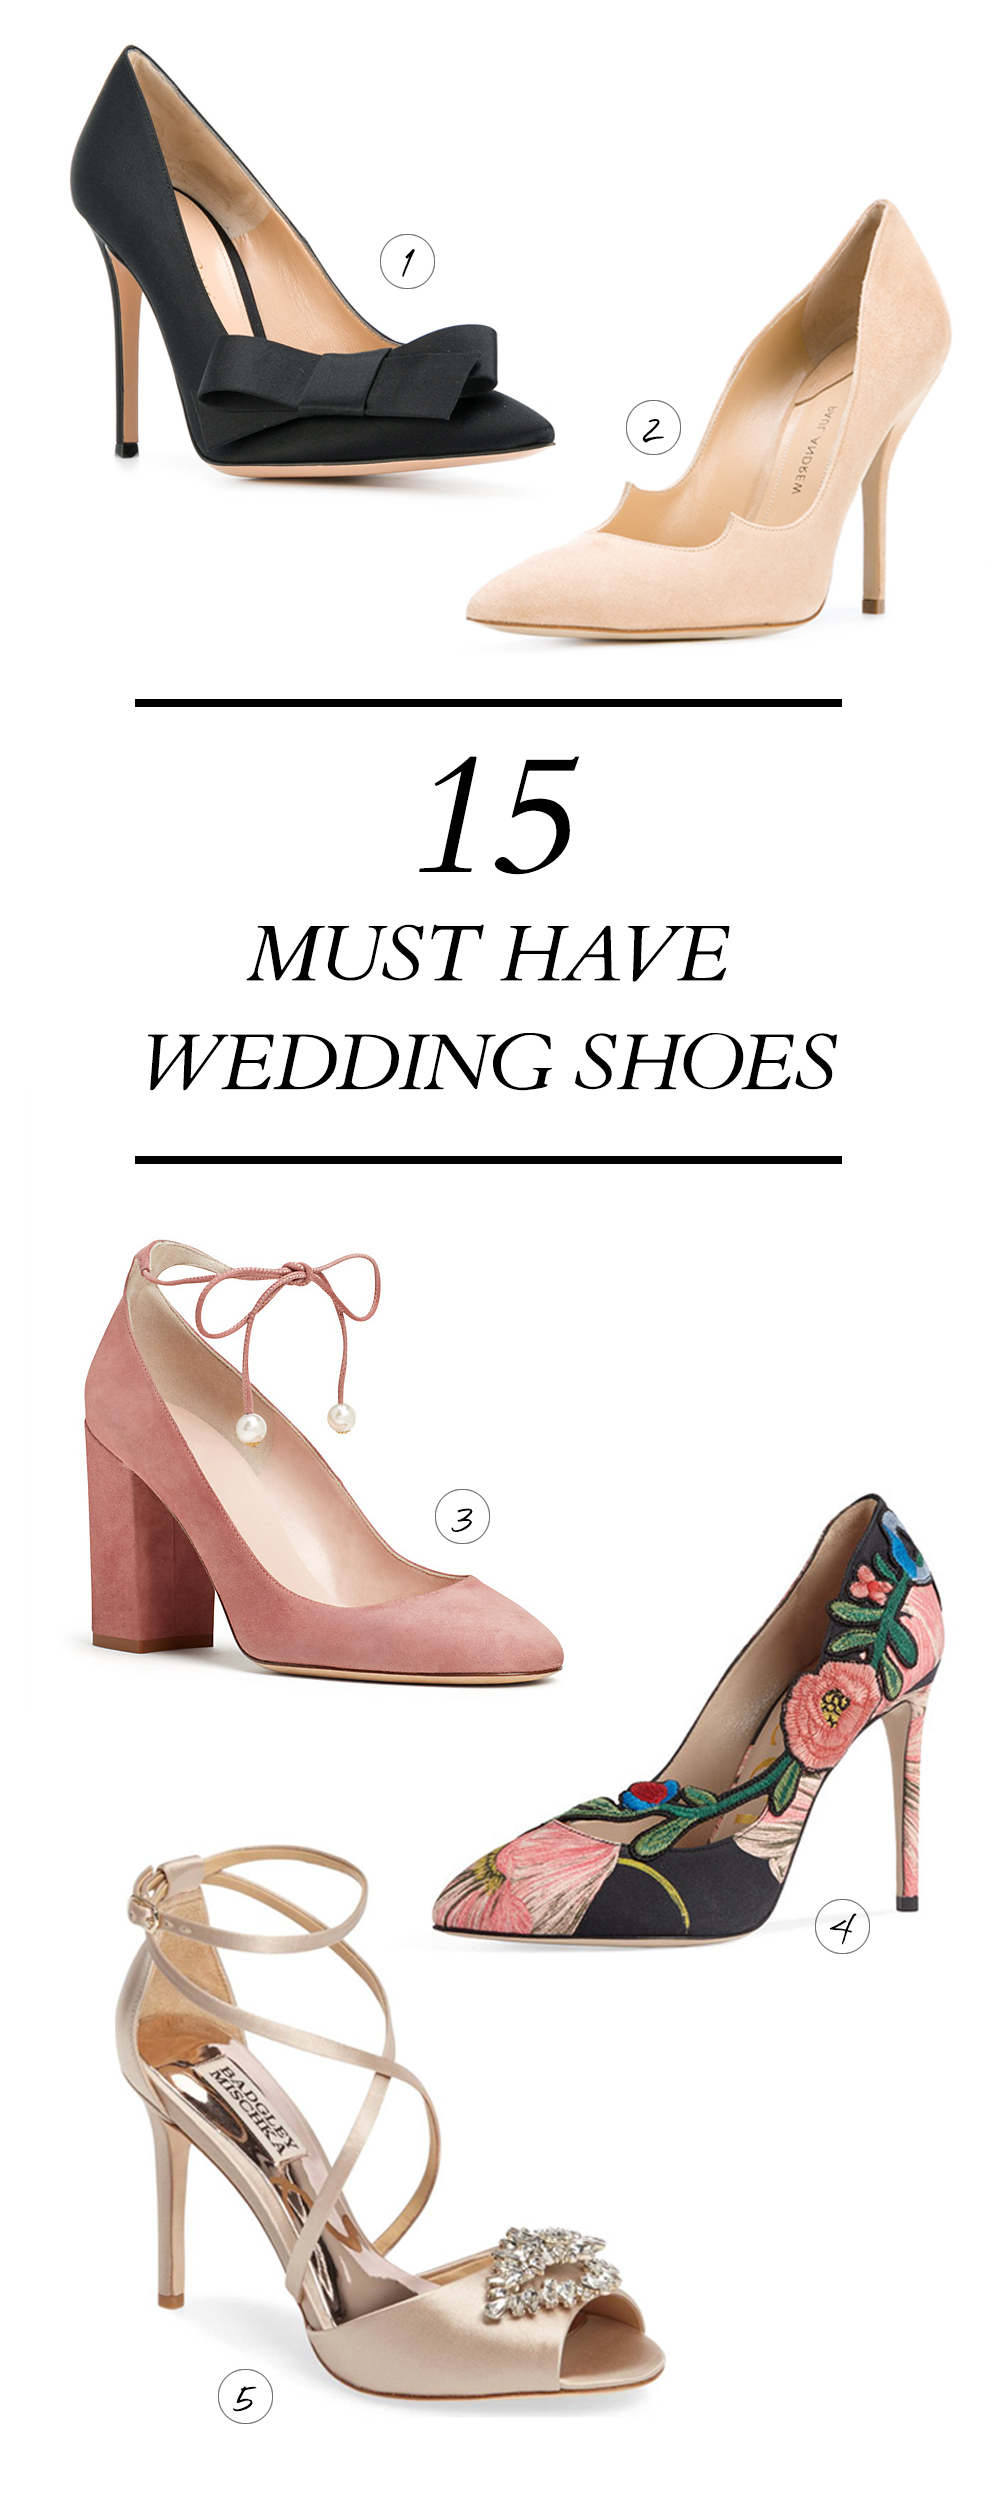 15 must have wedding shoes